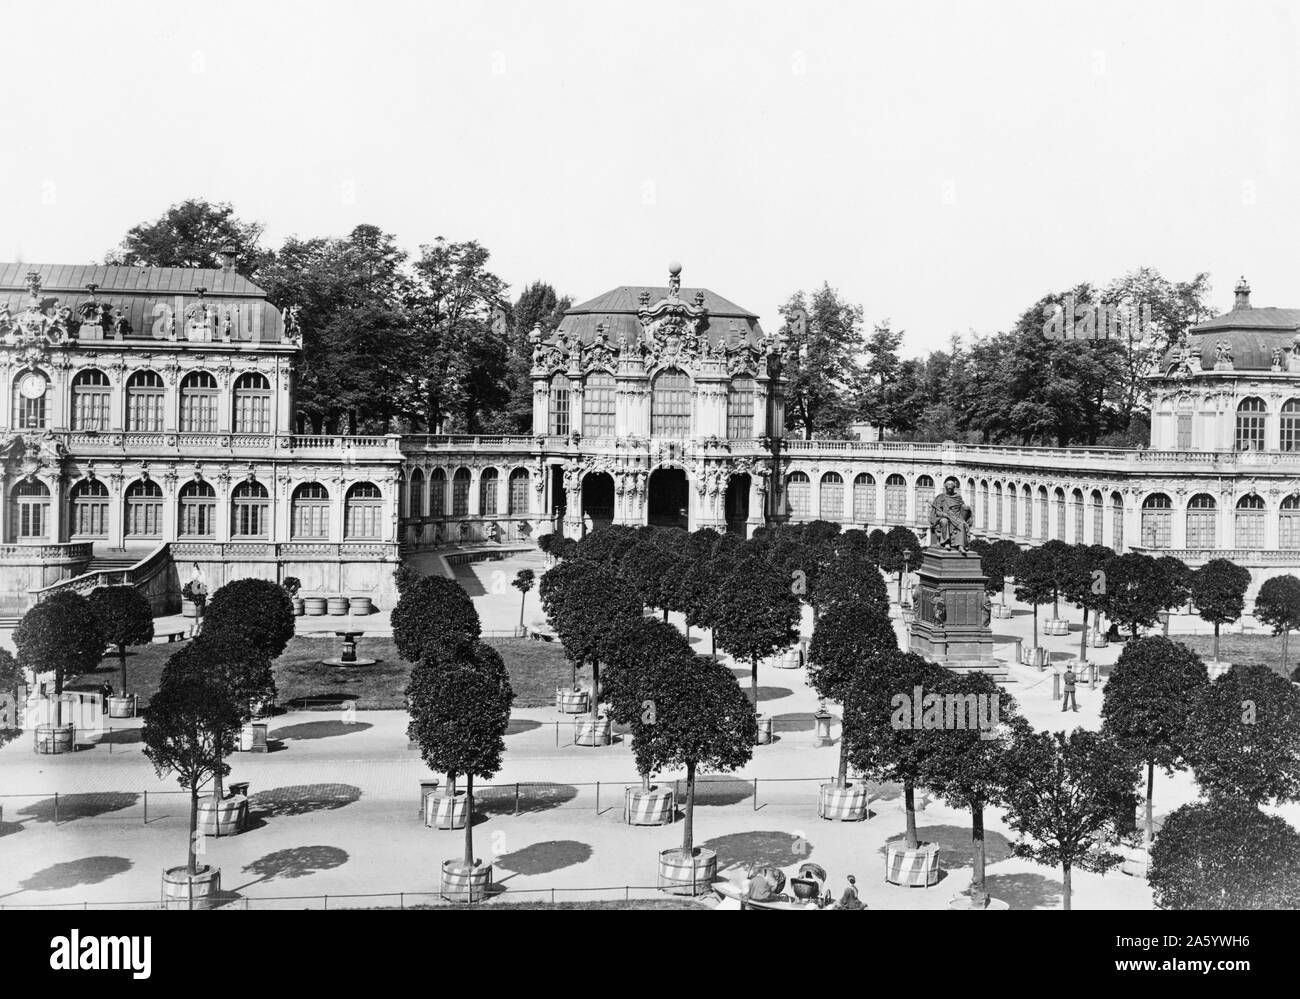 View of the old palace at Stuttgart, Germany. Showing the plaza with trees and statue of Friedrich Schiller Stock Photo